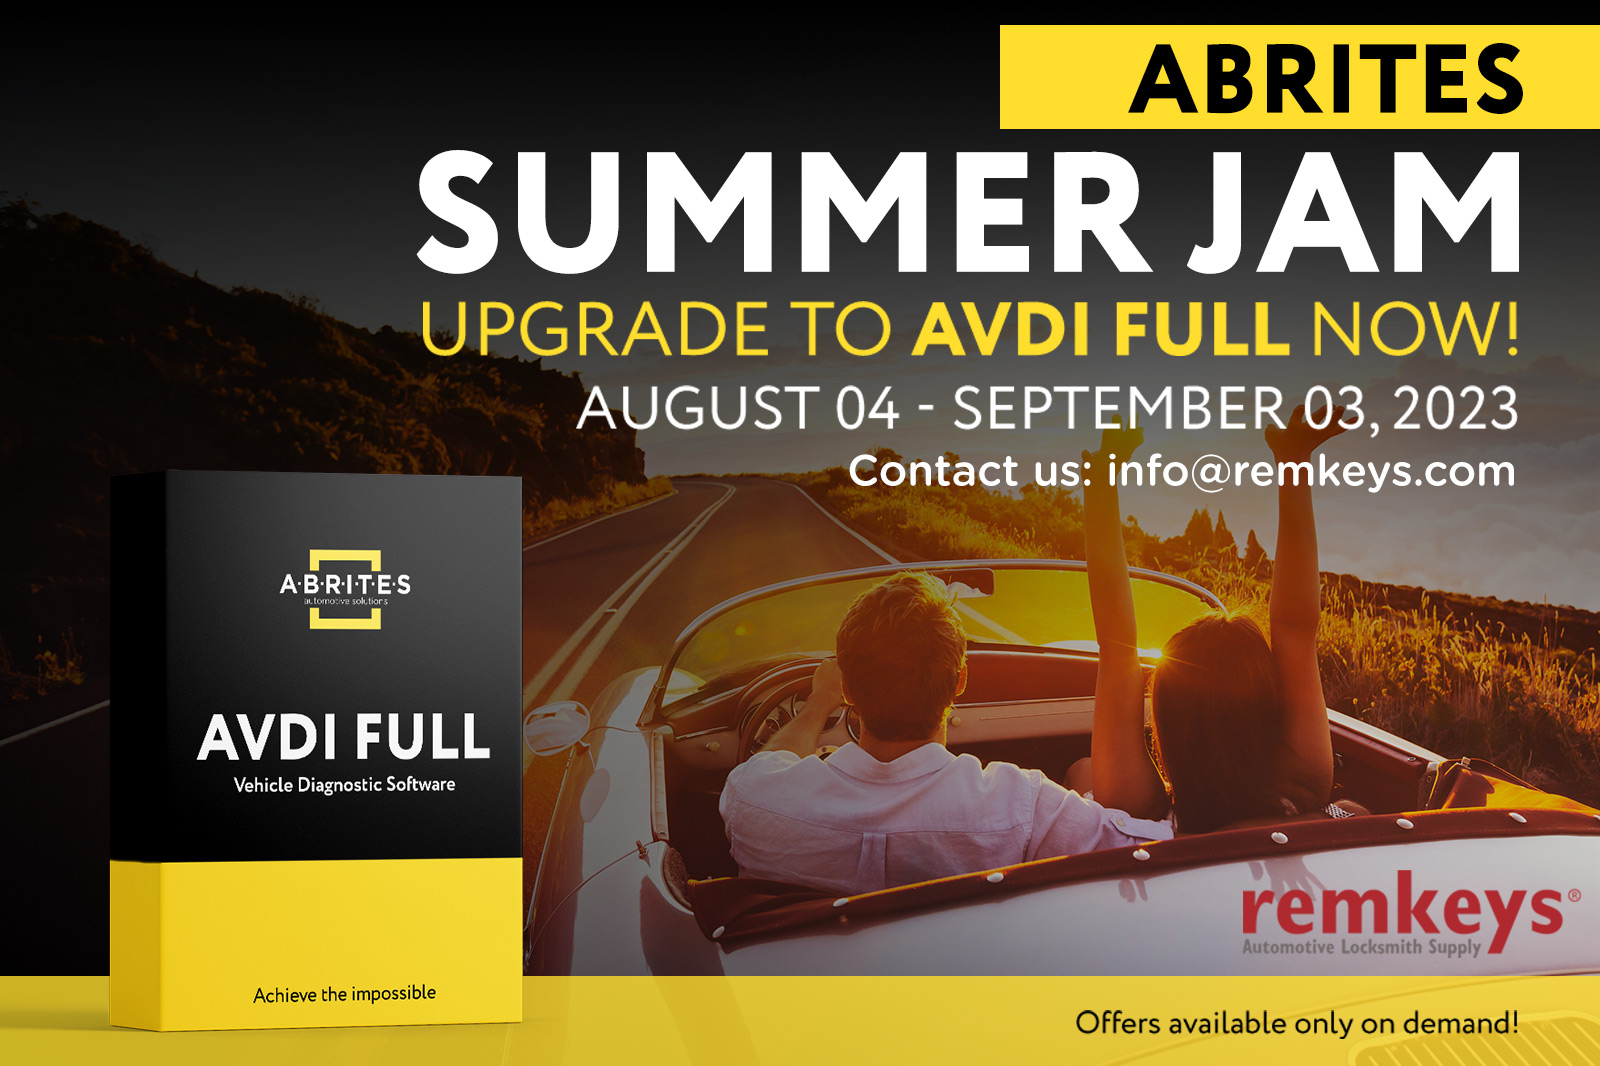 Abrites Summer jam - Up Your Game!